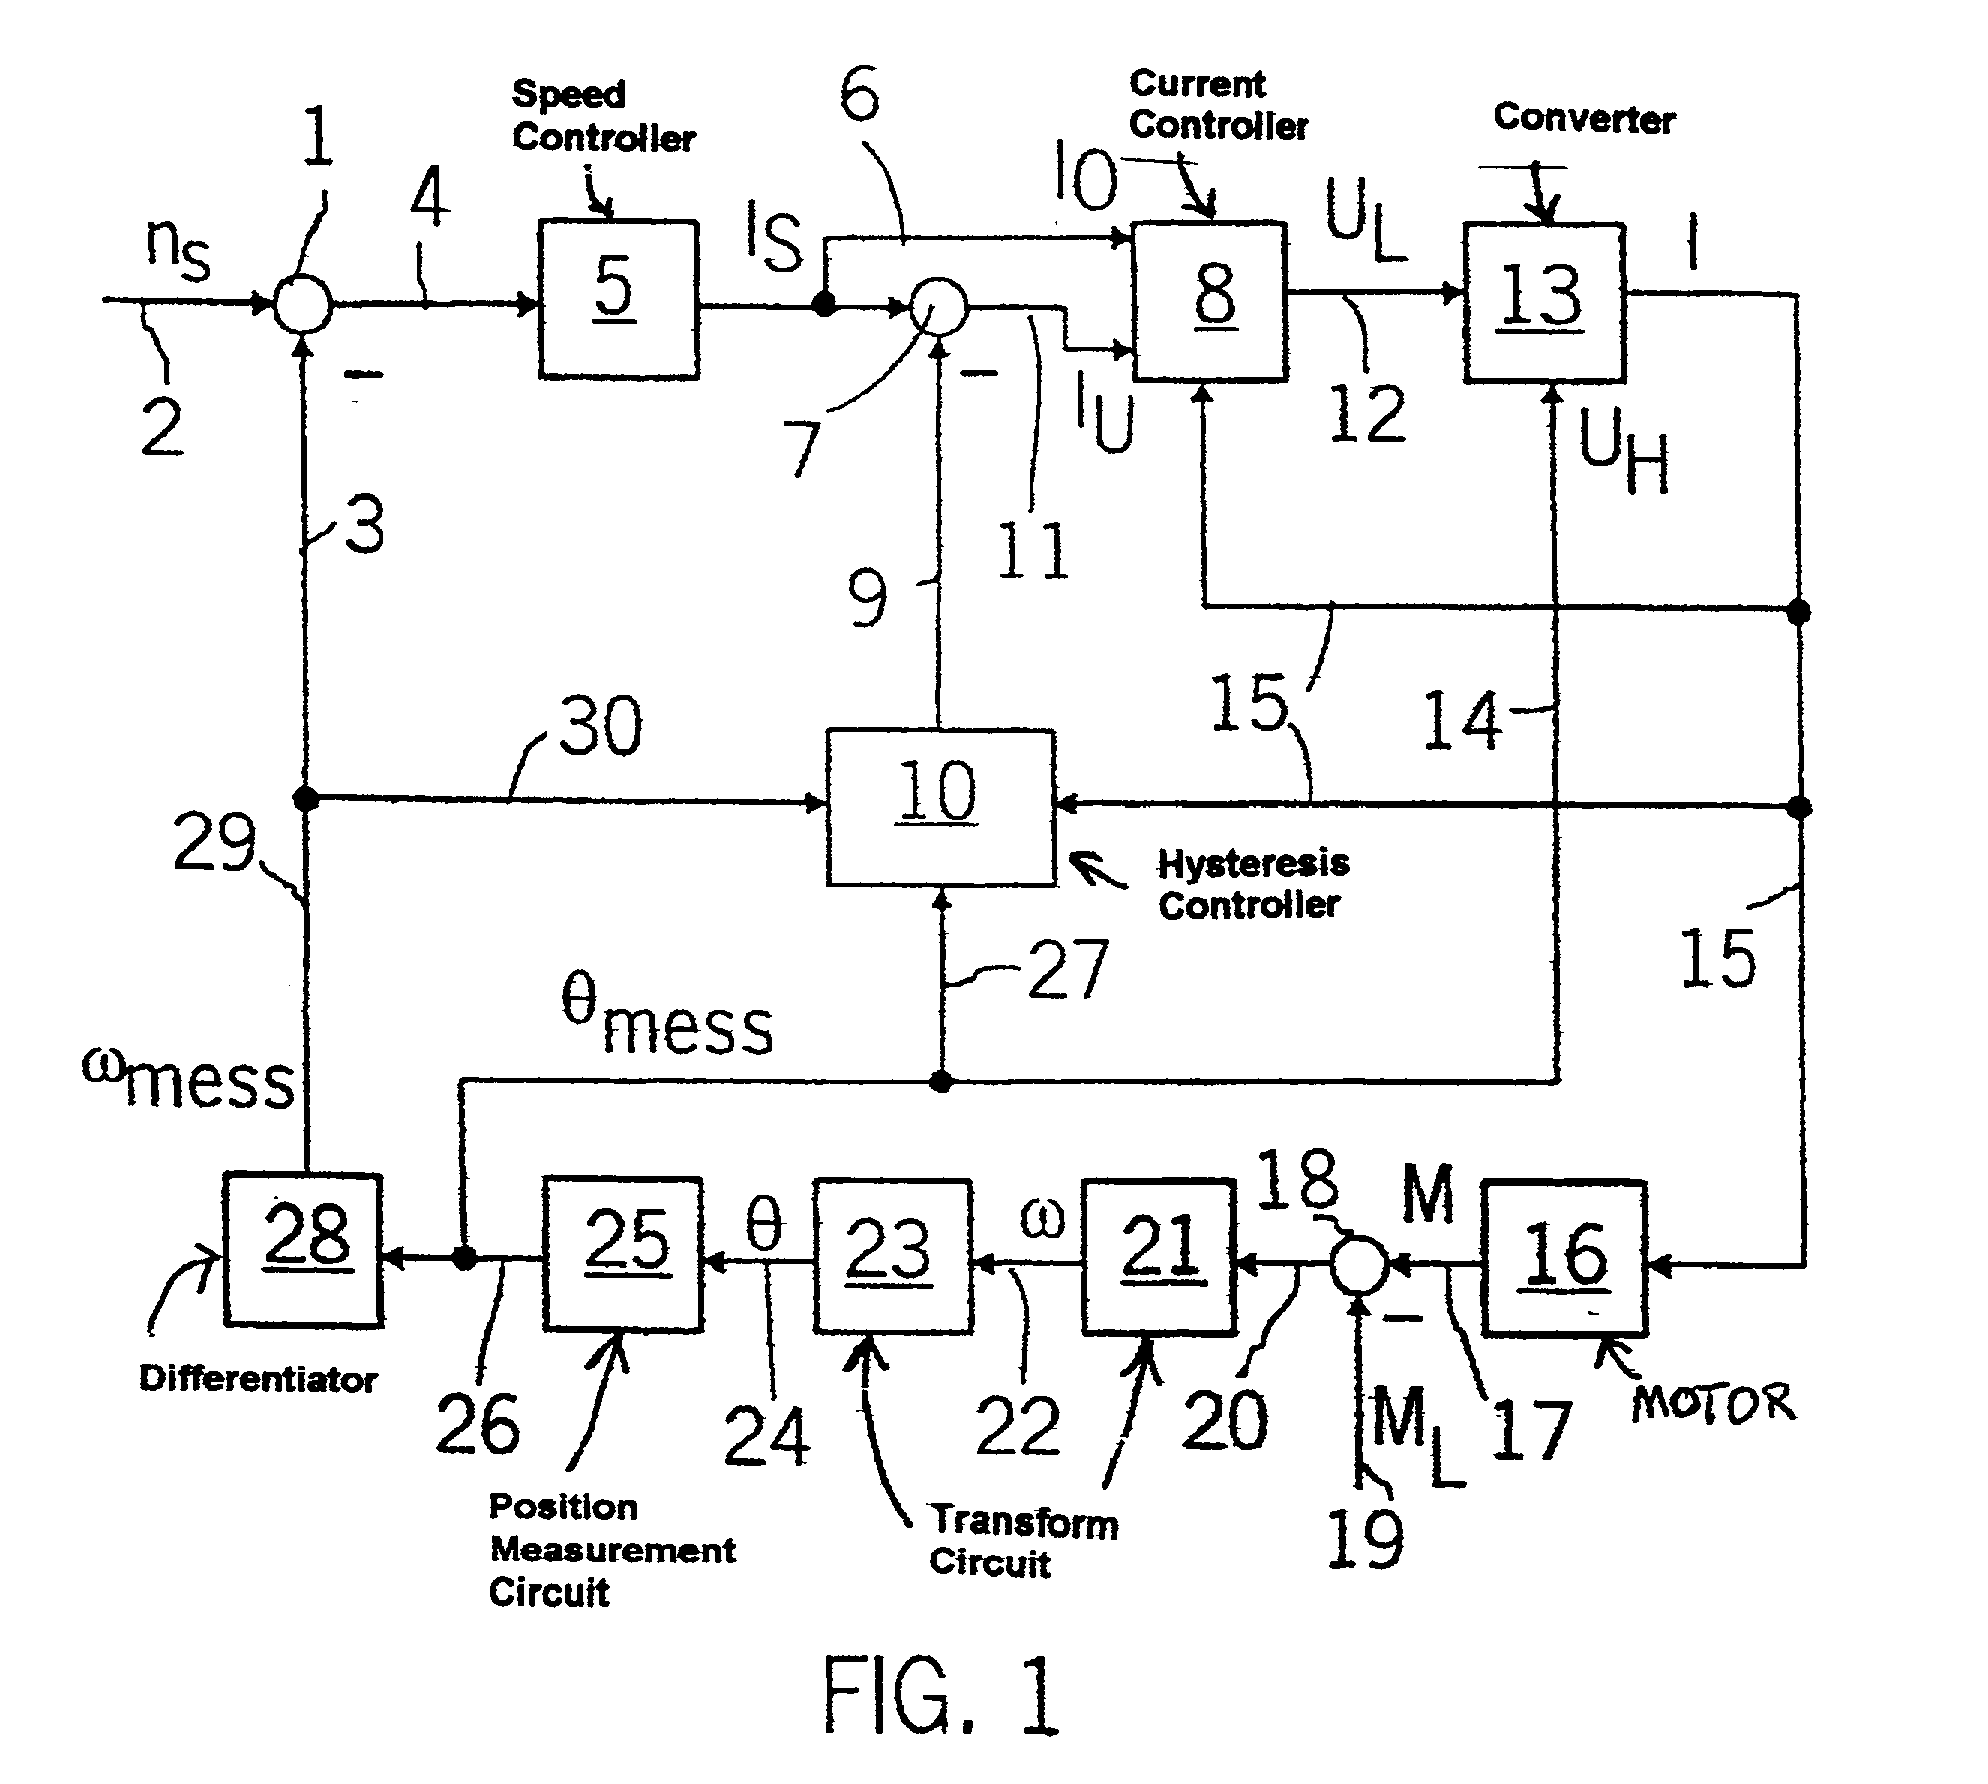 Method of controlling a frequency converter of a reluctance machine